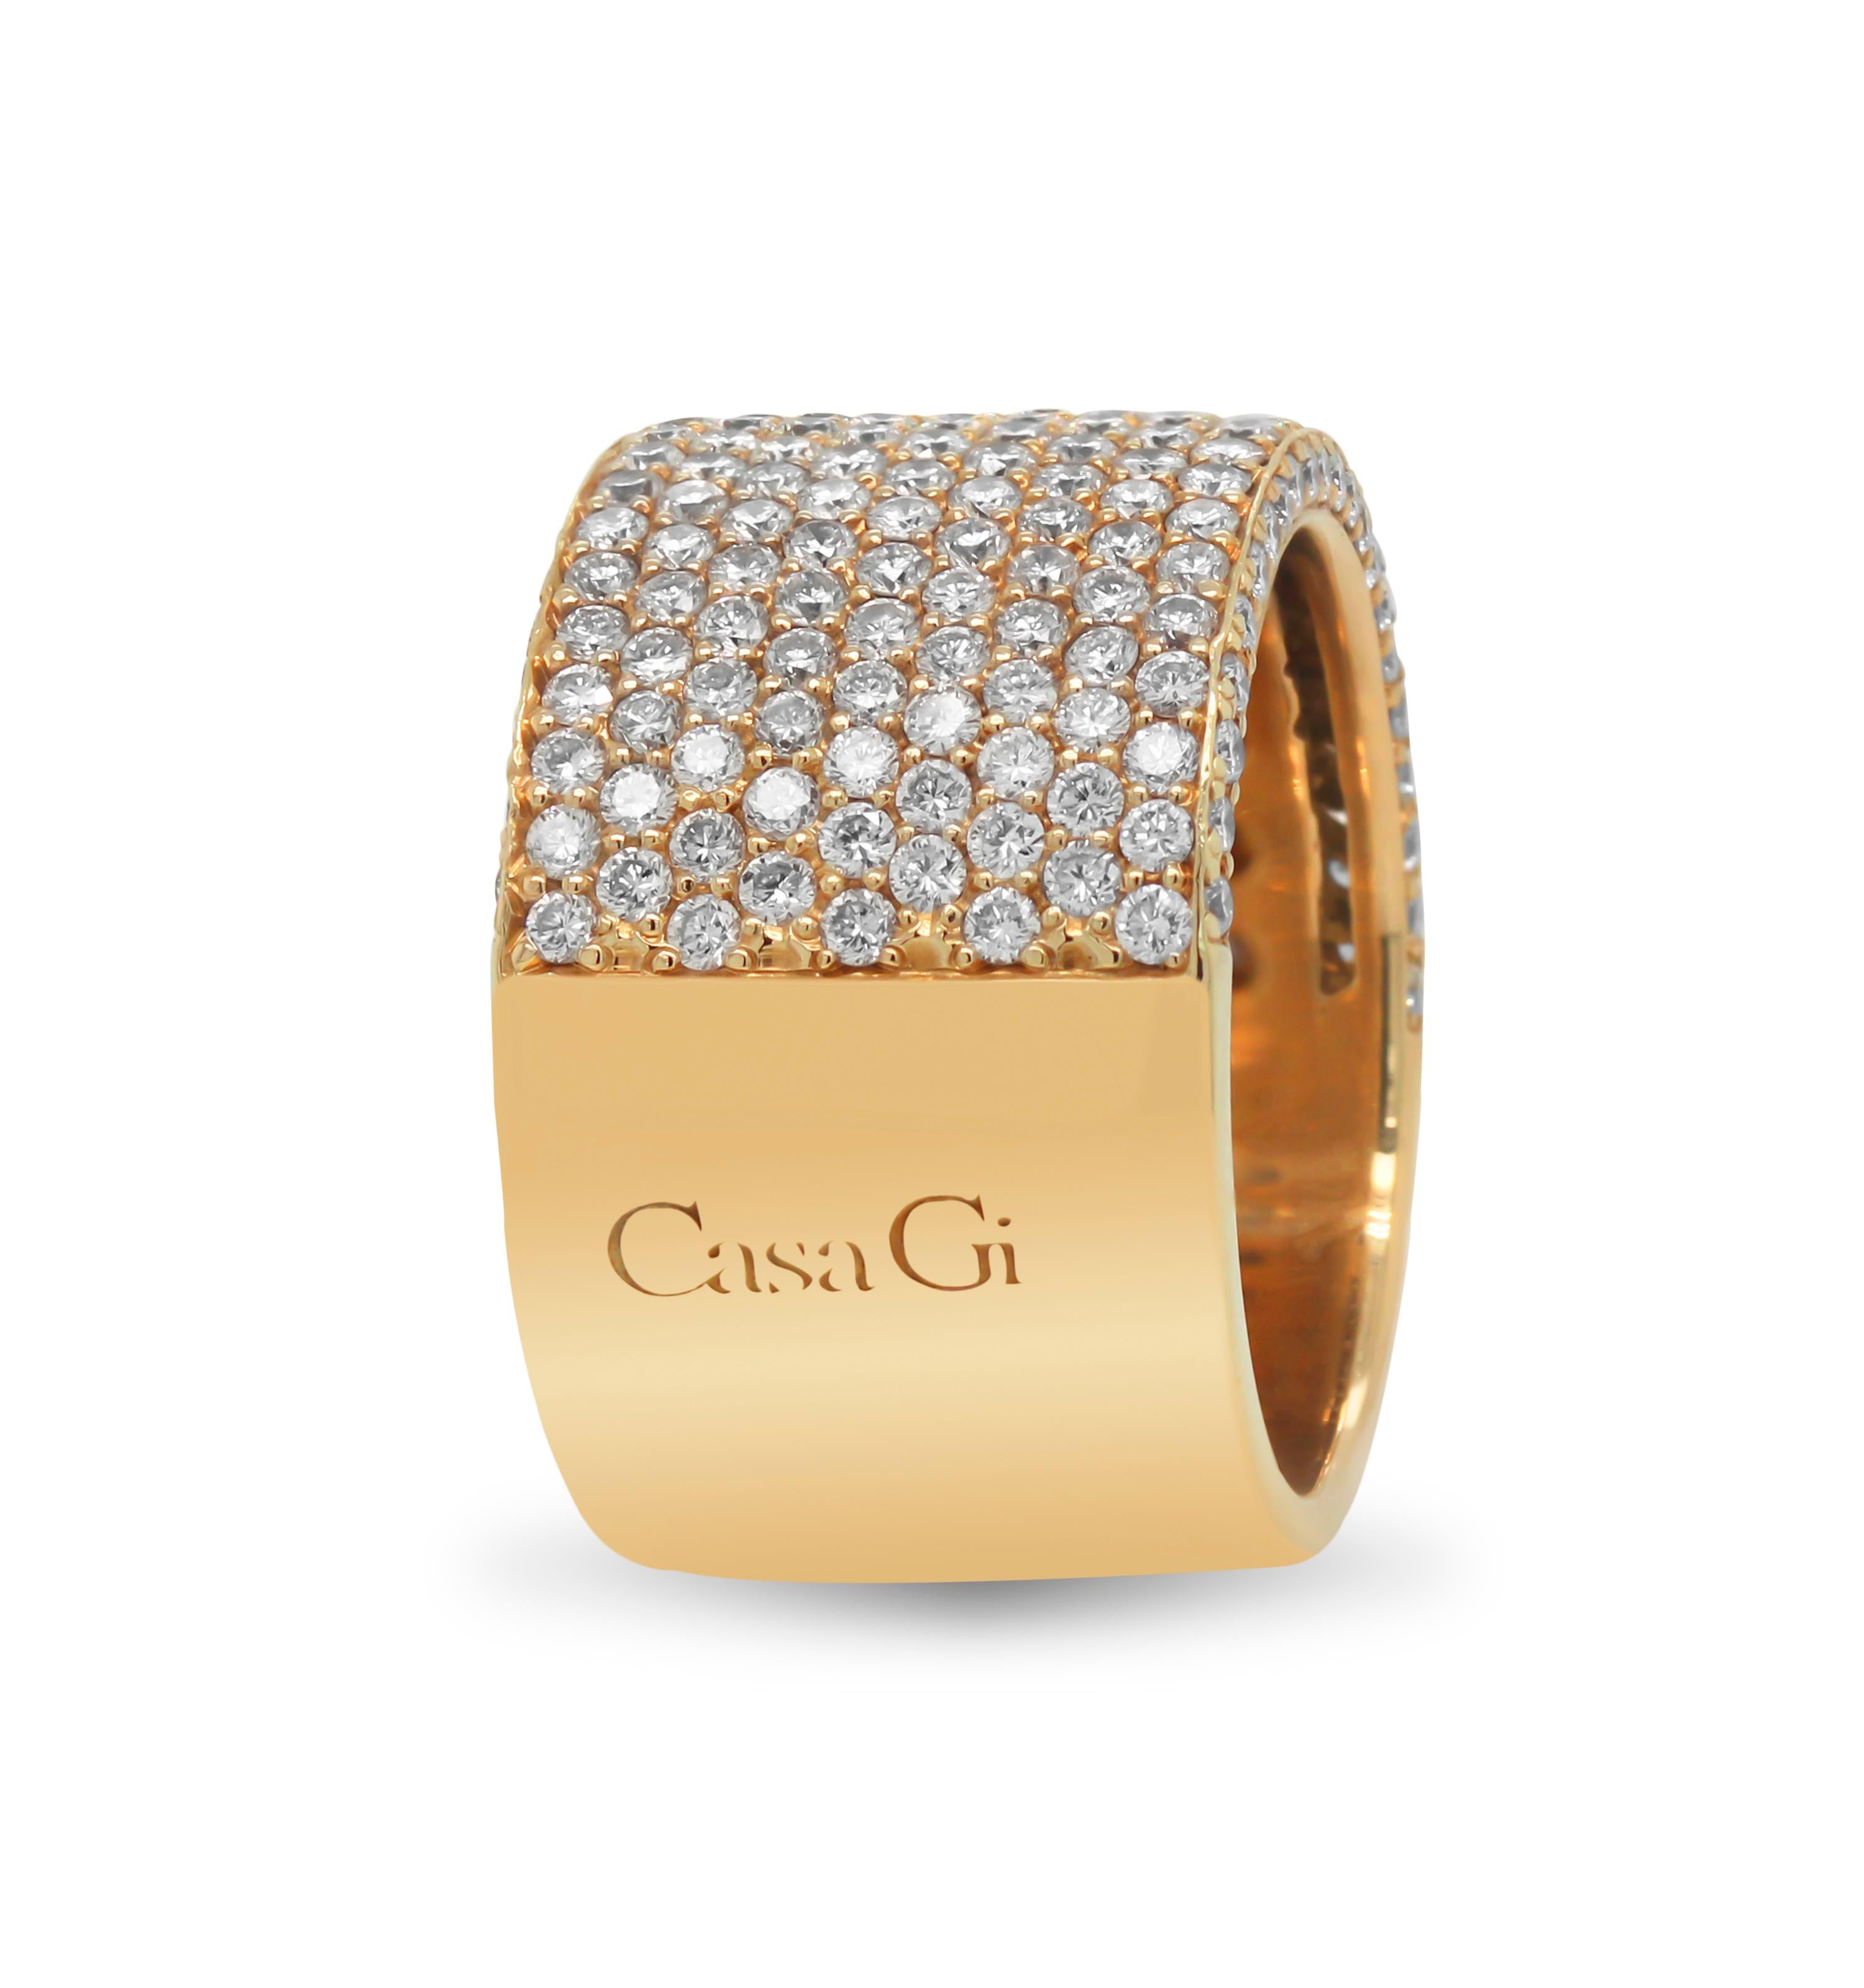 Casa Gi Designer 18K Yellow Gold Diamond Wide Cigar Band Ring 

This state-of-the-art wide band ring by Casa G features pavé set diamonds half way.

2.95 carat G color, VS clarity diamonds

13.6mm band width.

Size 7. Sizable by request. 